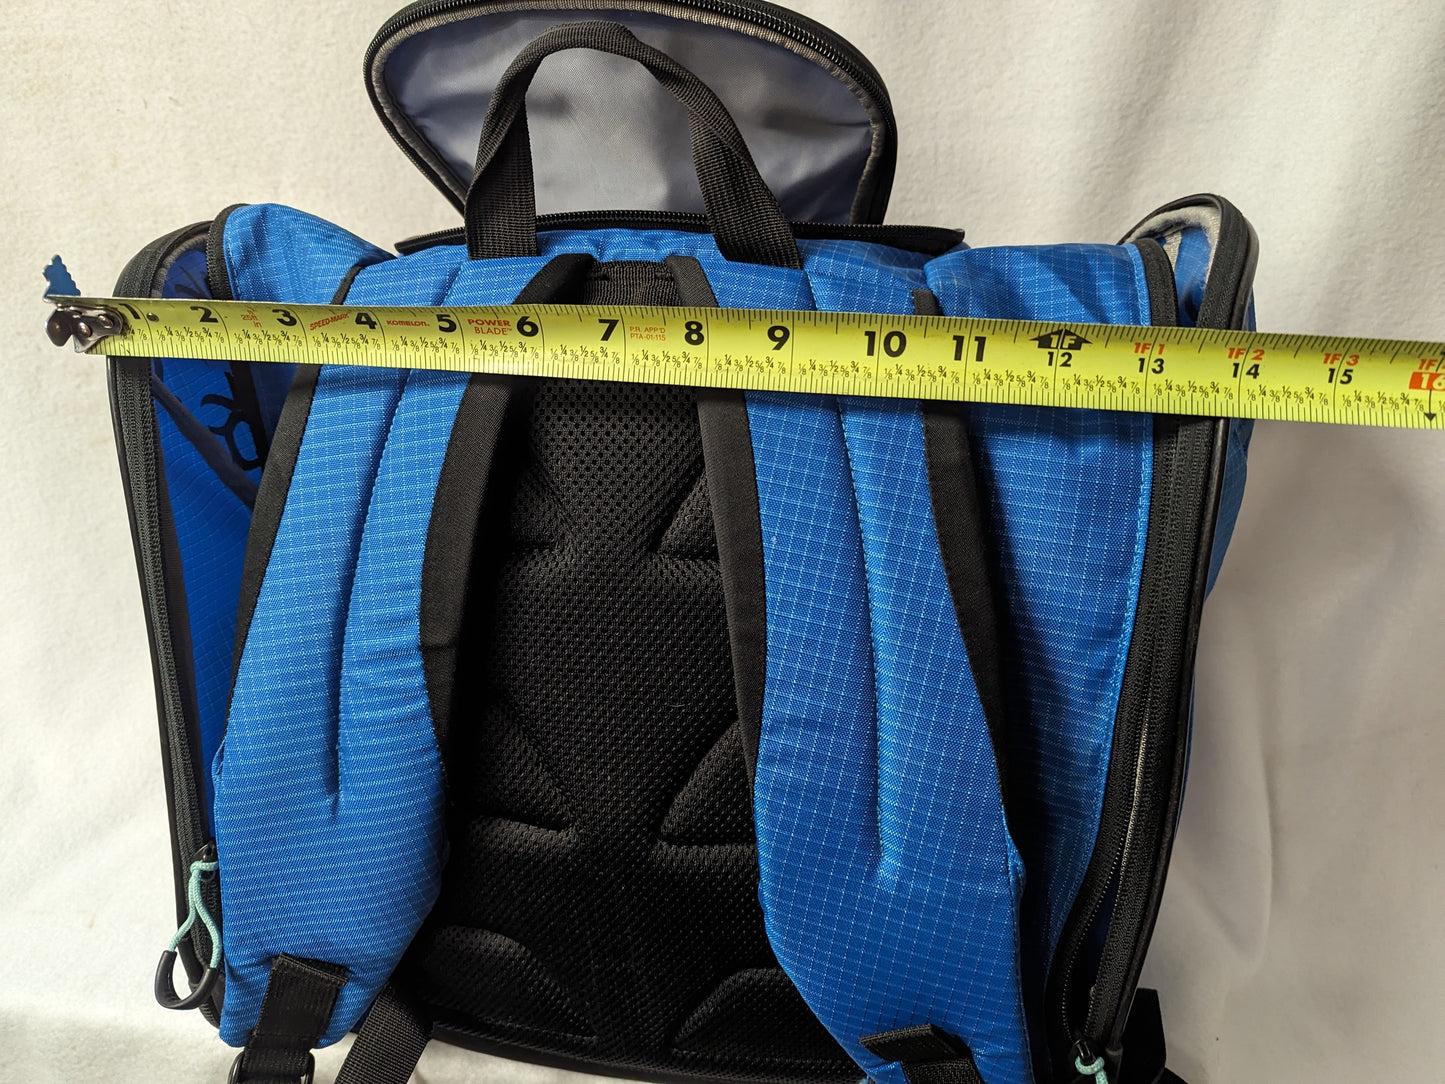 Kulkea Ski Boot Bag w/Shoulder and Backpack Straps Size 14 In x 14 In x 12 In Color Blue Condition Used